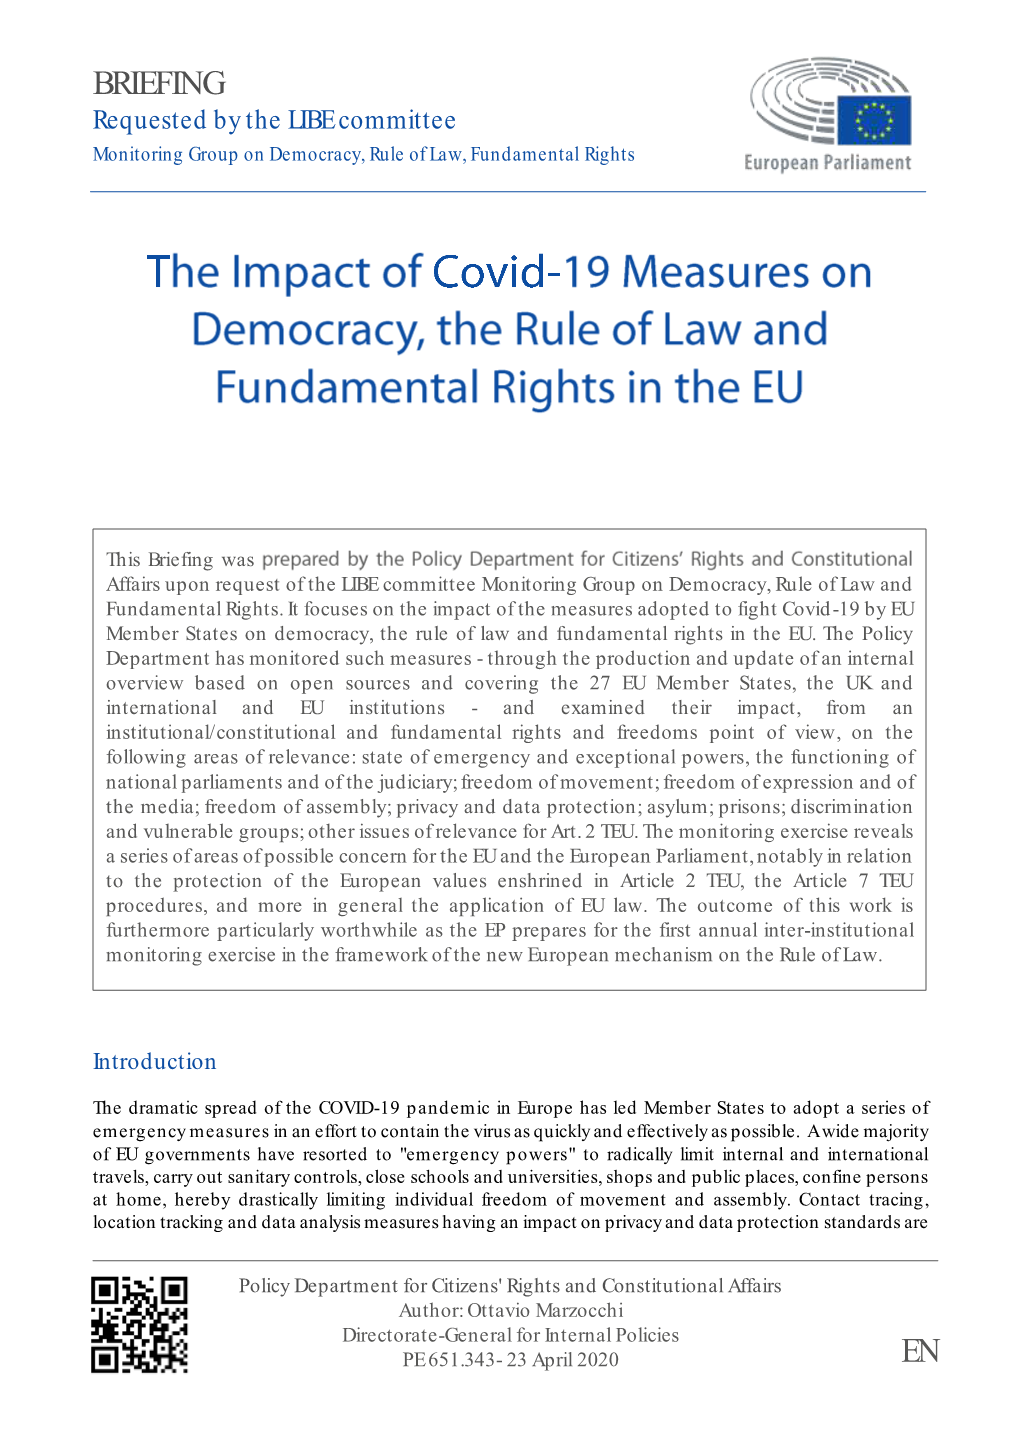 The Impact of Covid-19 Measures on Democracy, the Rule of Law and Fundamental Rights in the EU